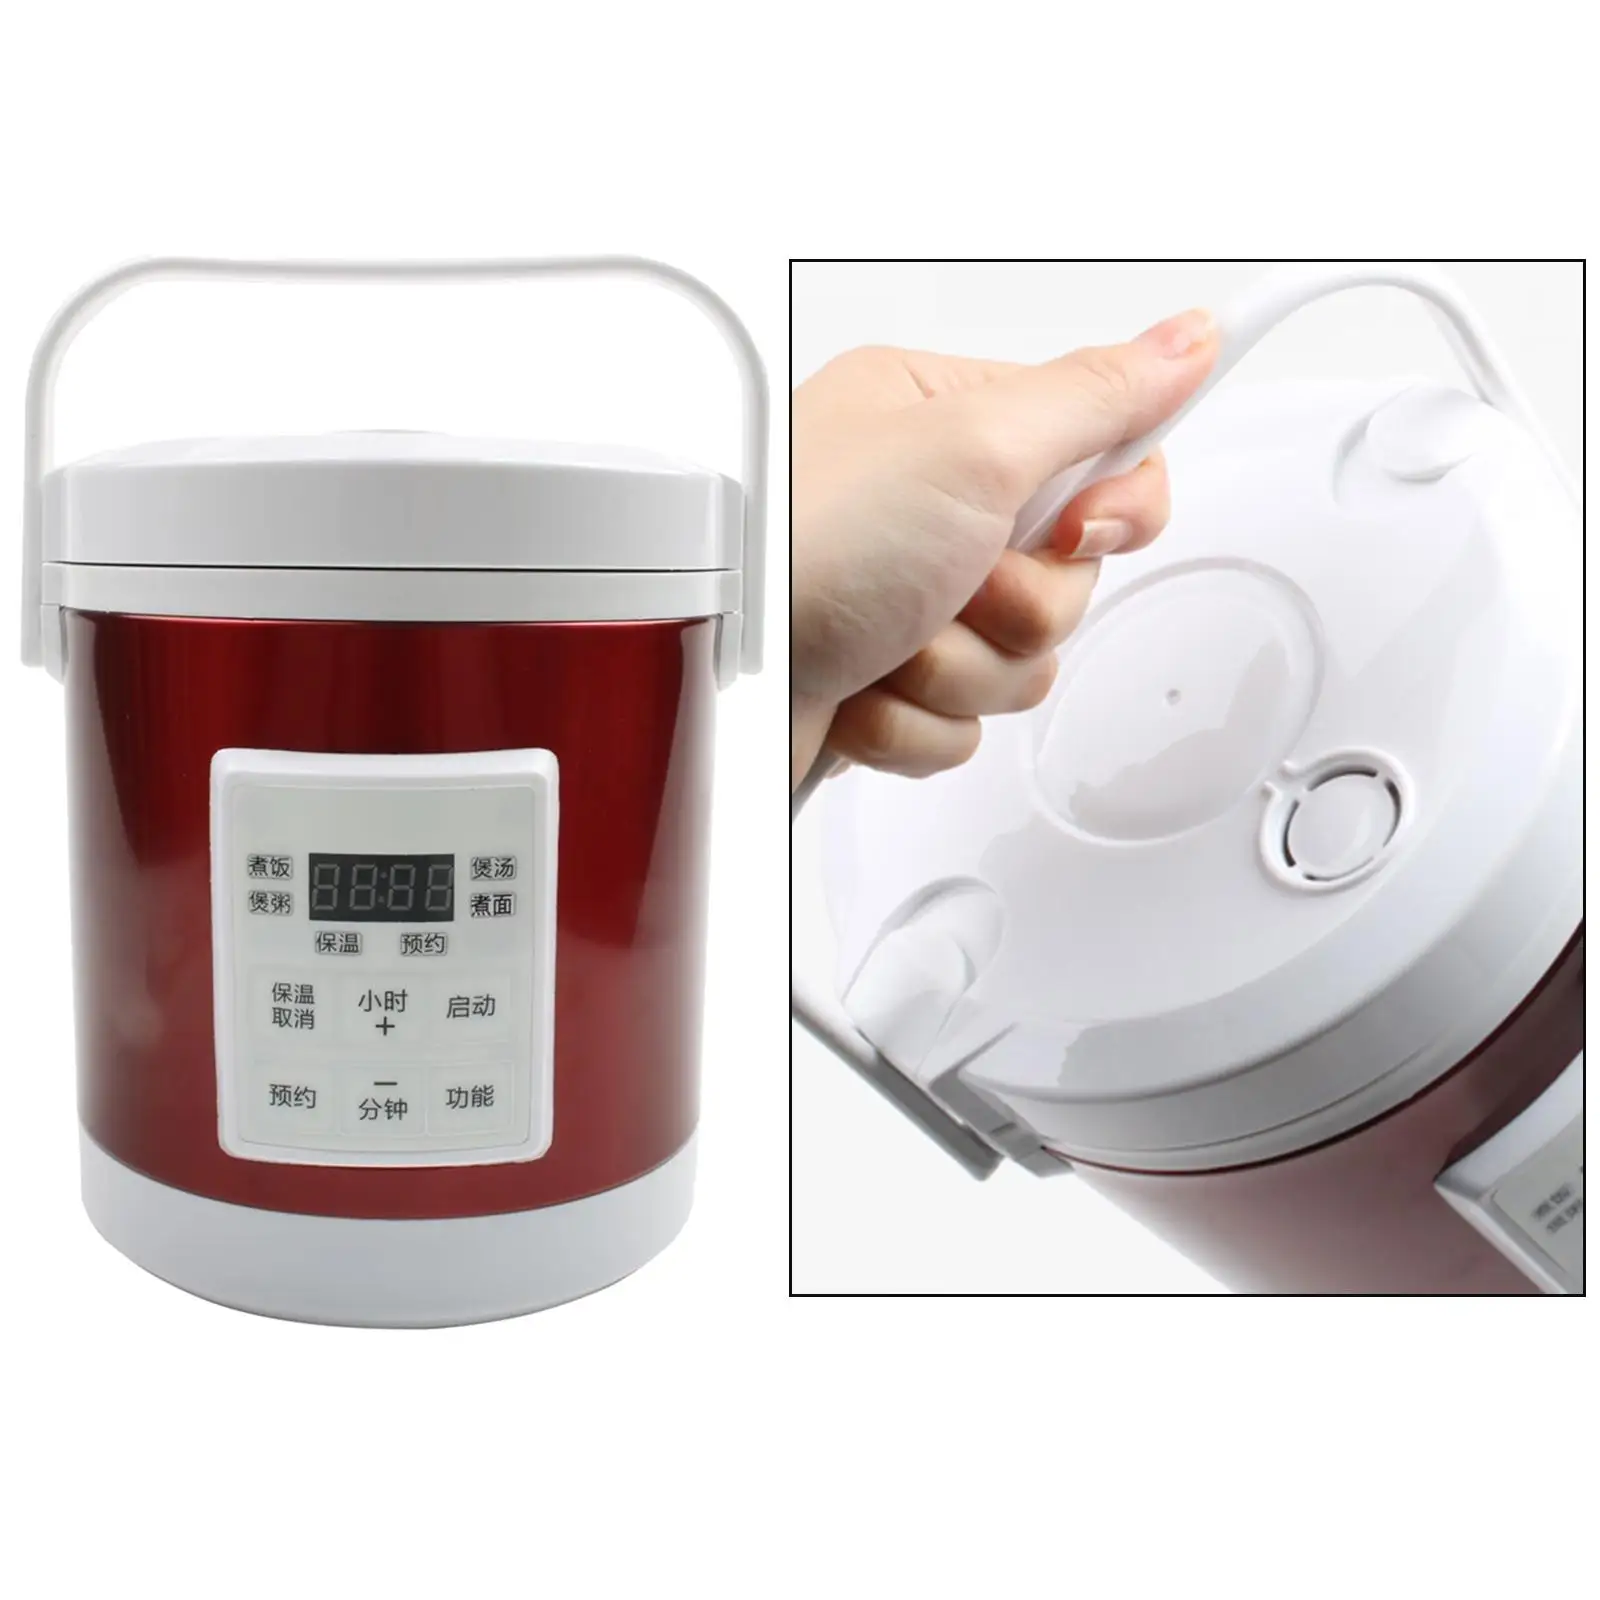 12V/24W 1.6L Electric Portable Multifunctional Rice Cooker Food Steamer Travel Portable Cooking Heating Meal Cooking Pots